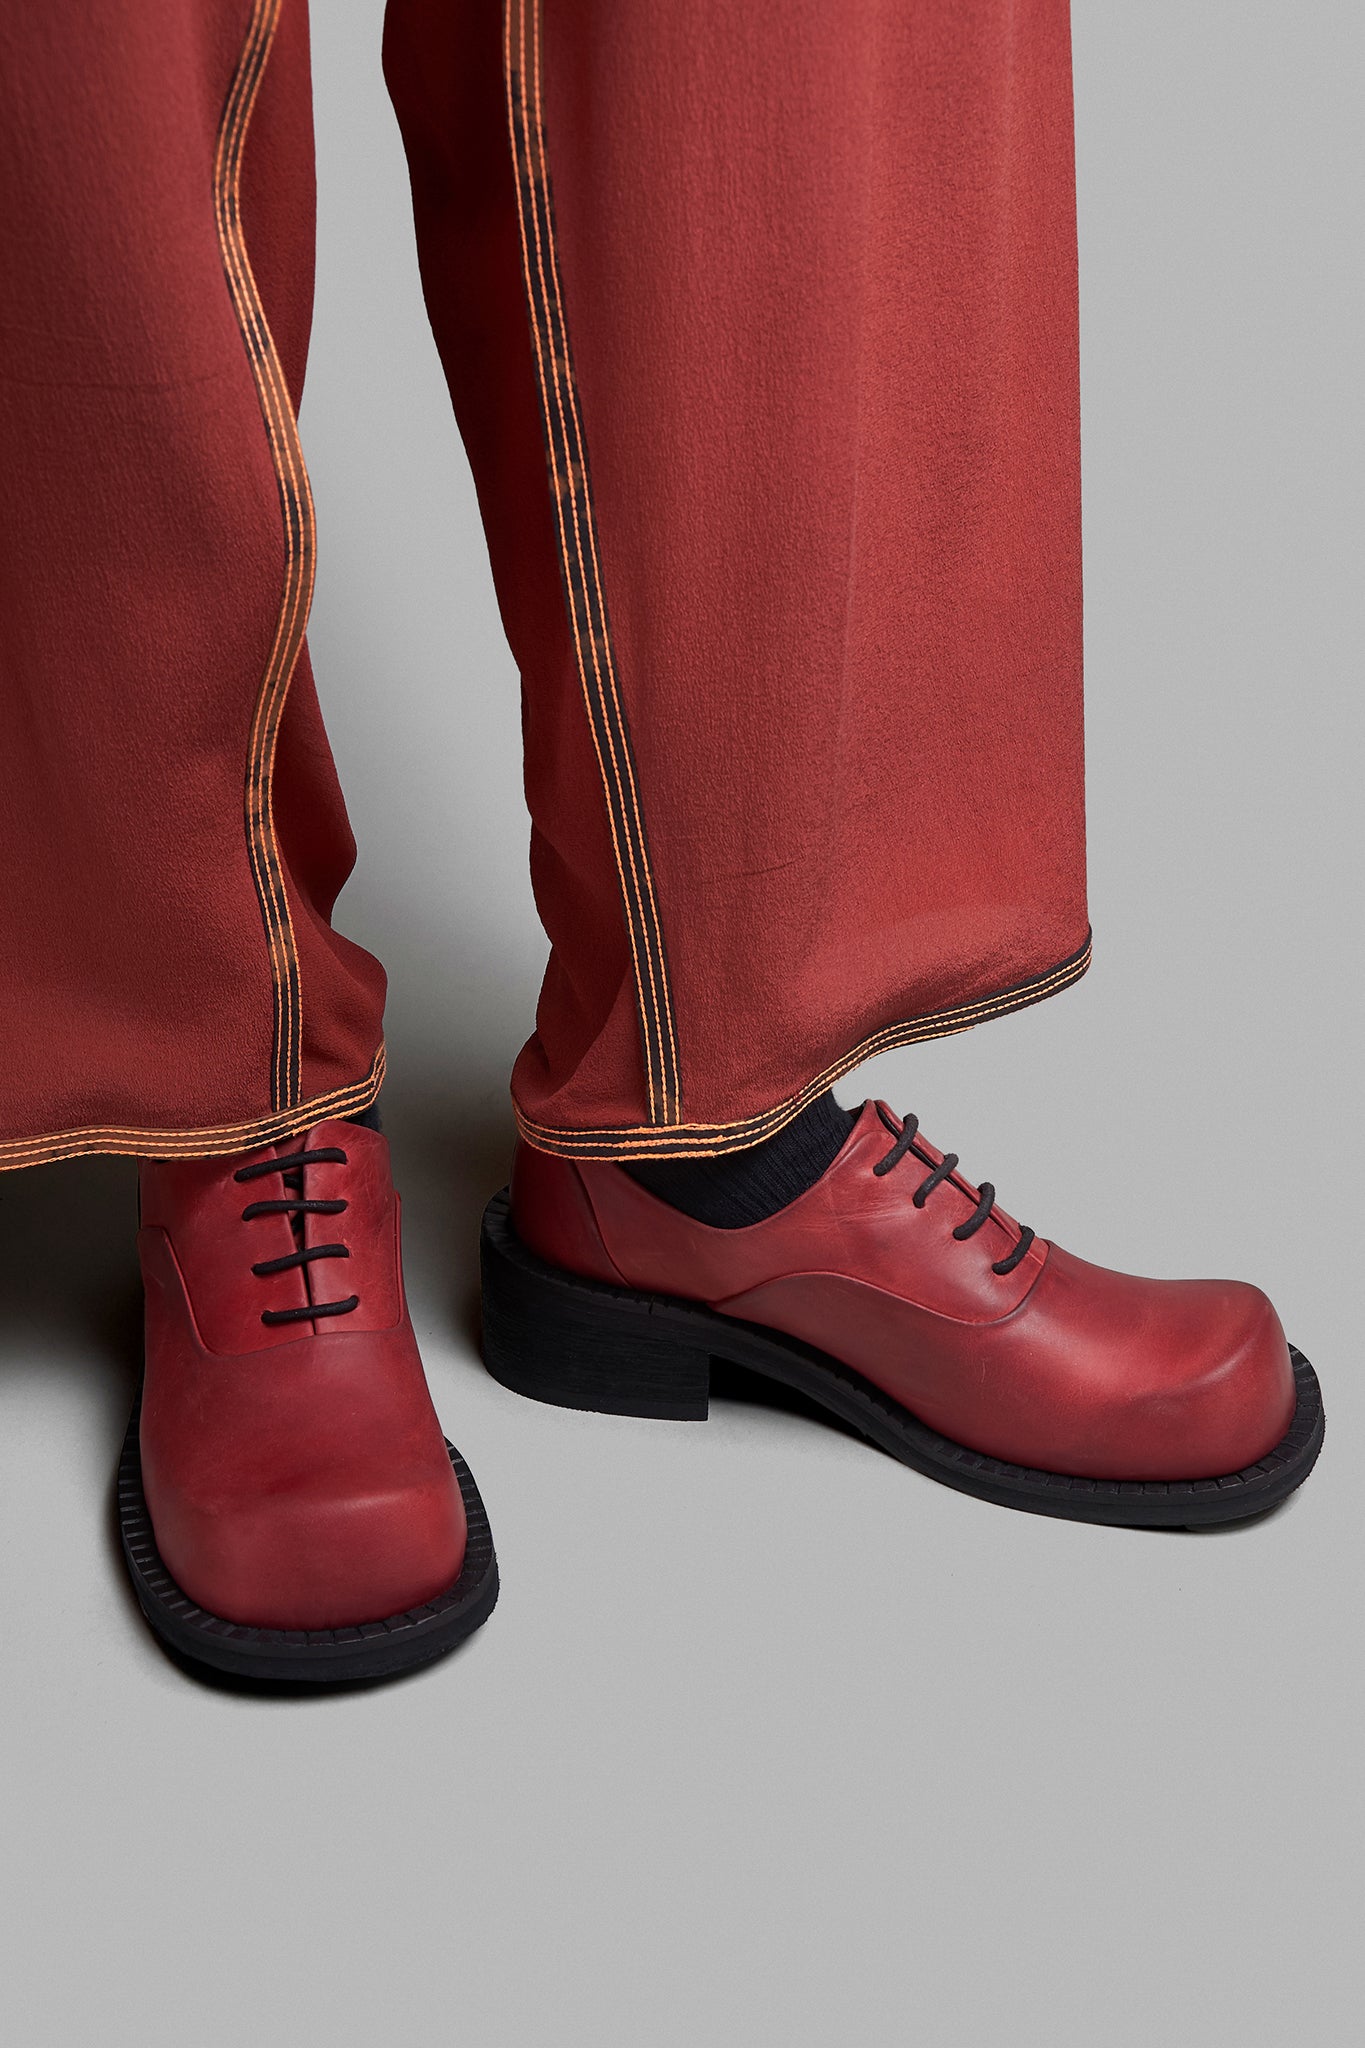 Wide Toe Oxford - Old Red